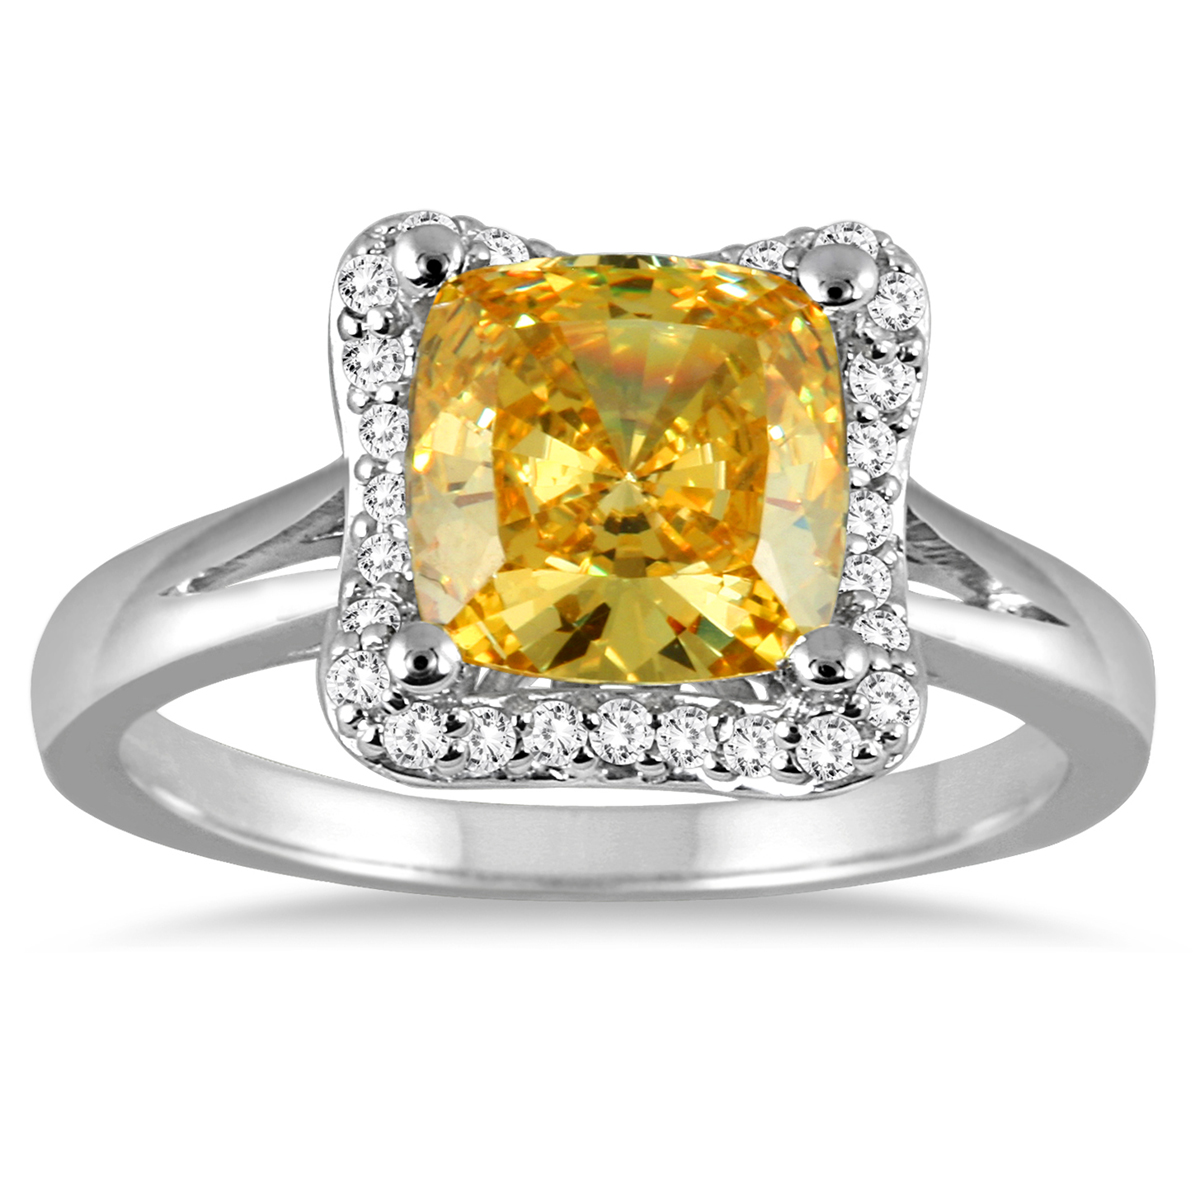 2 Carat Cushion Cut Citrine and Diamond Ring in 14K White Gold